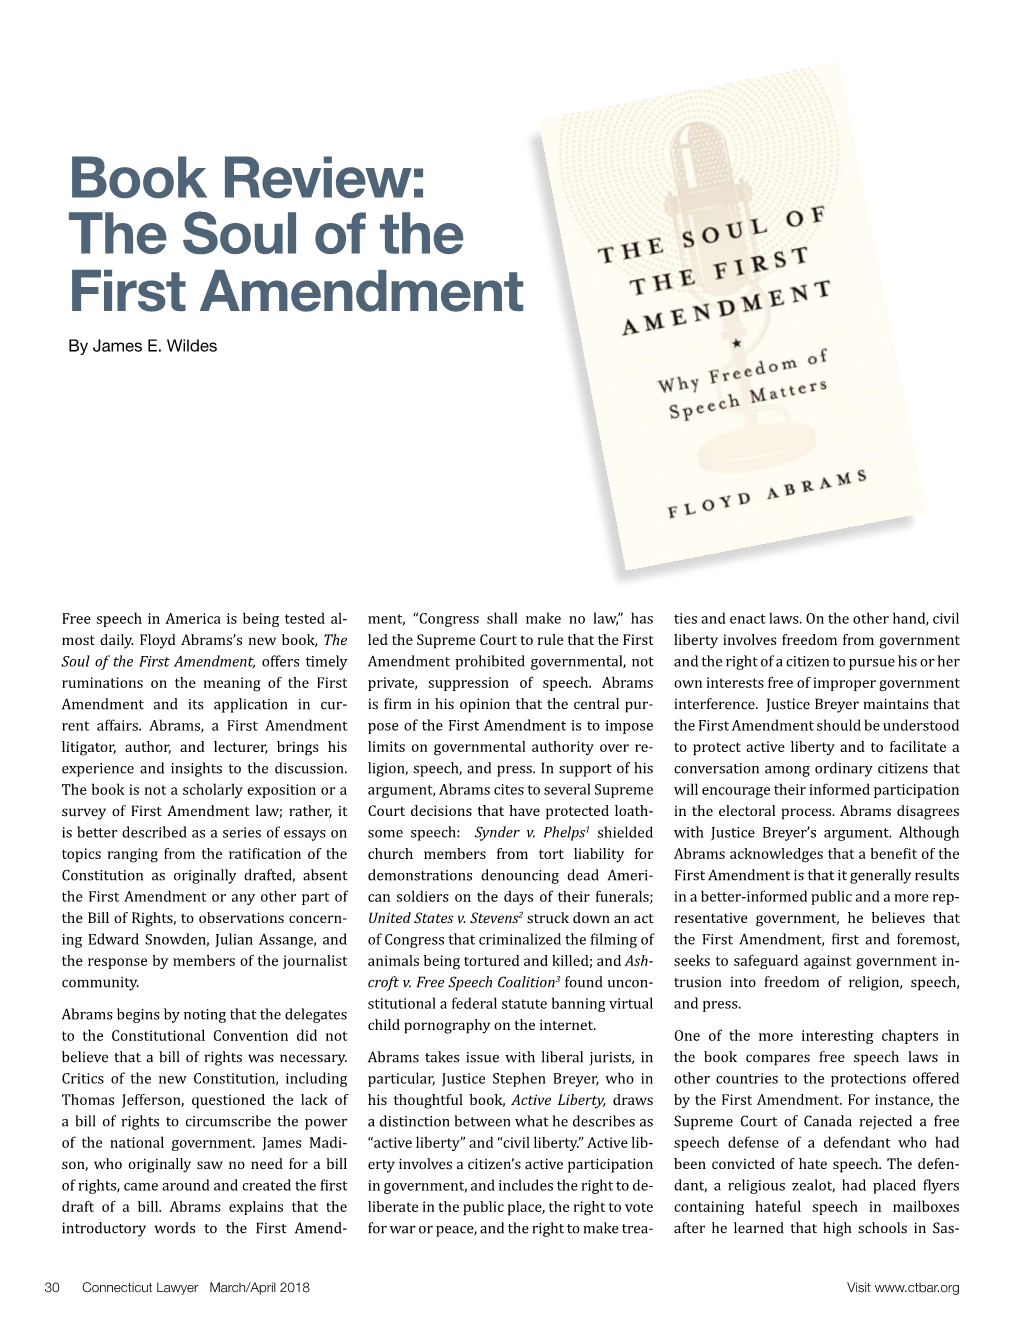 Book Review: the Soul of the First Amendment by James E